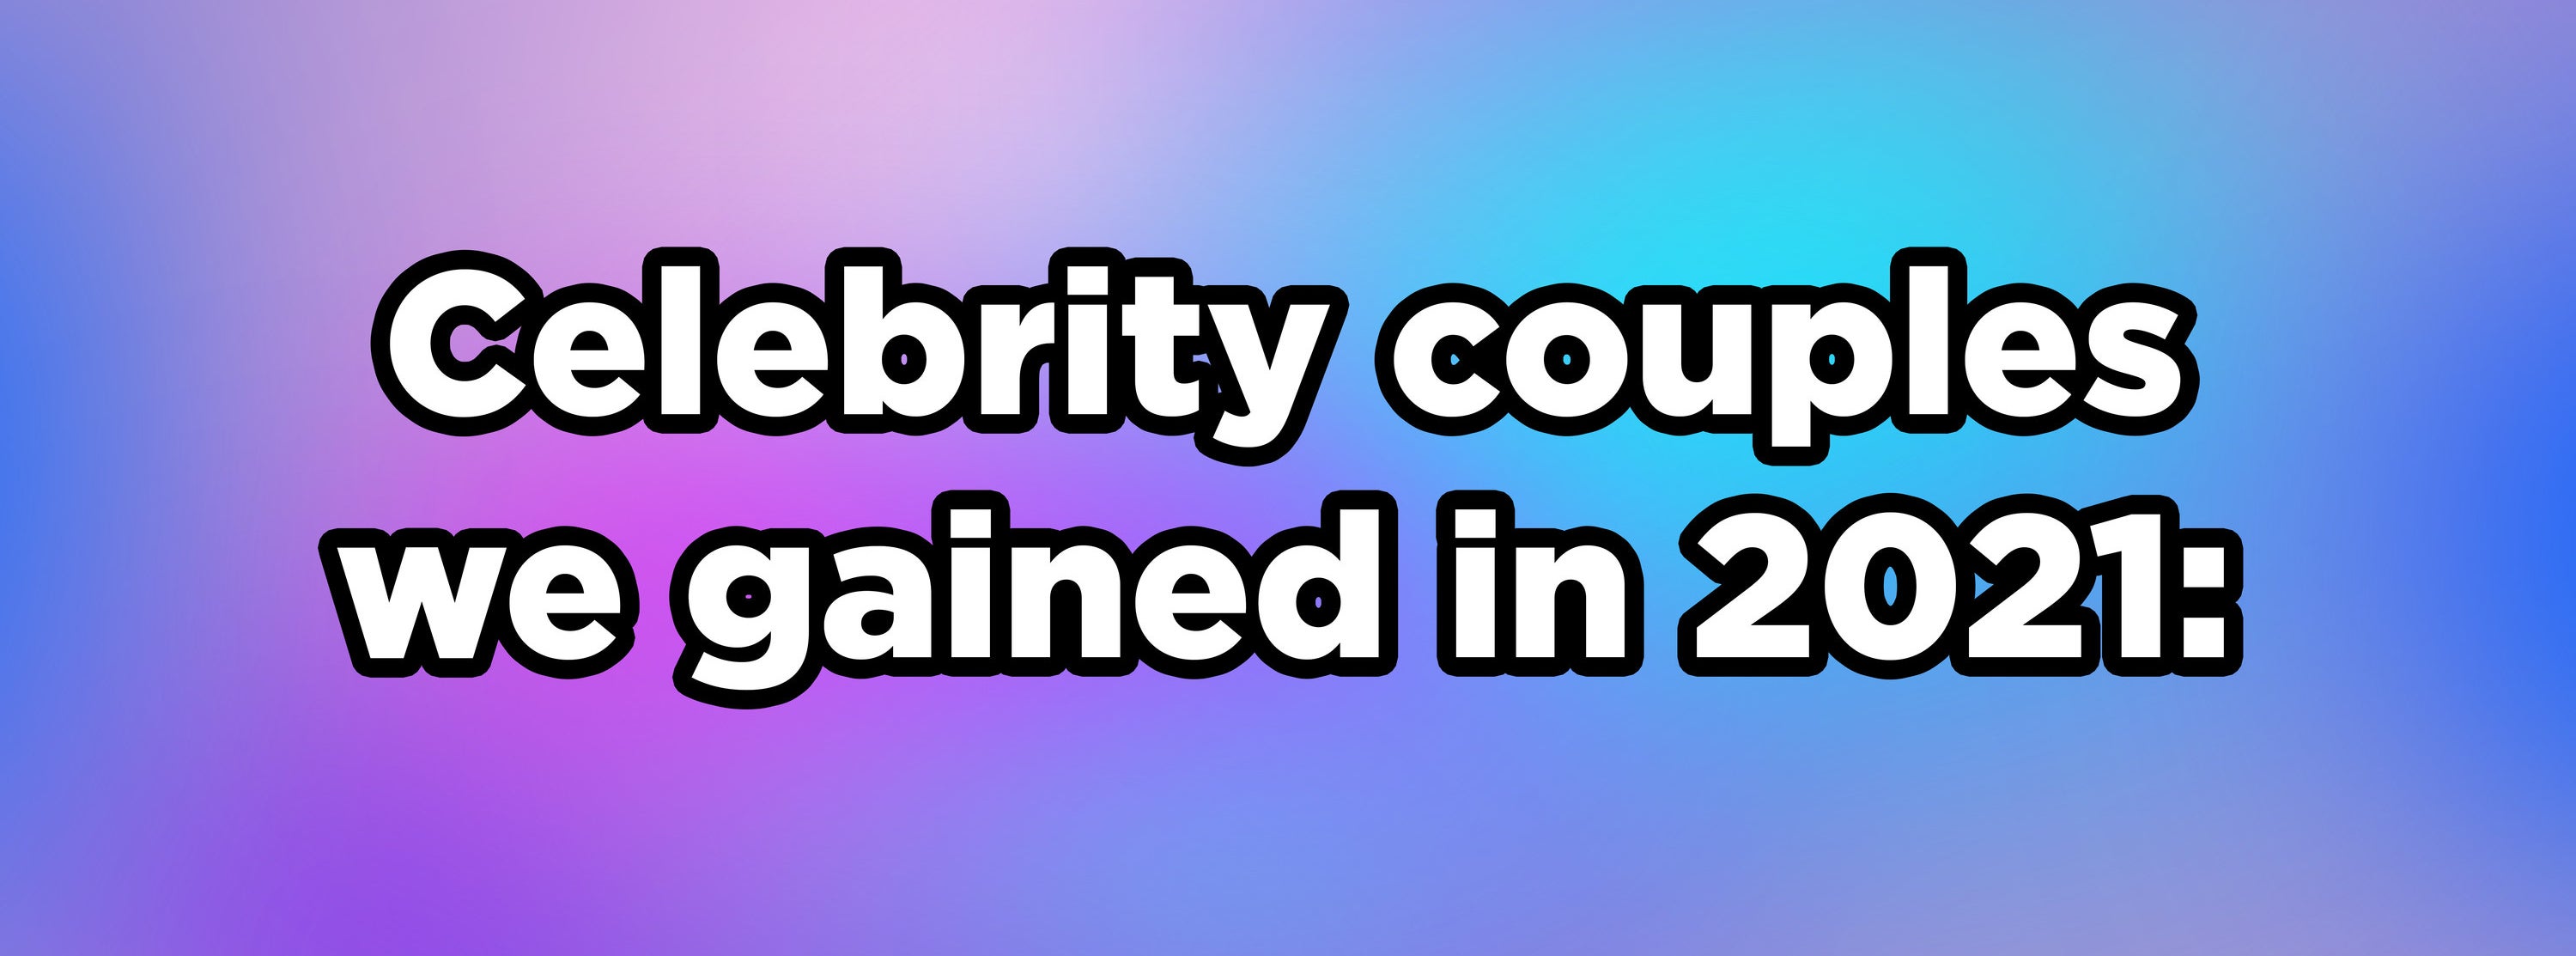 Celebrity couples we gained in 2021